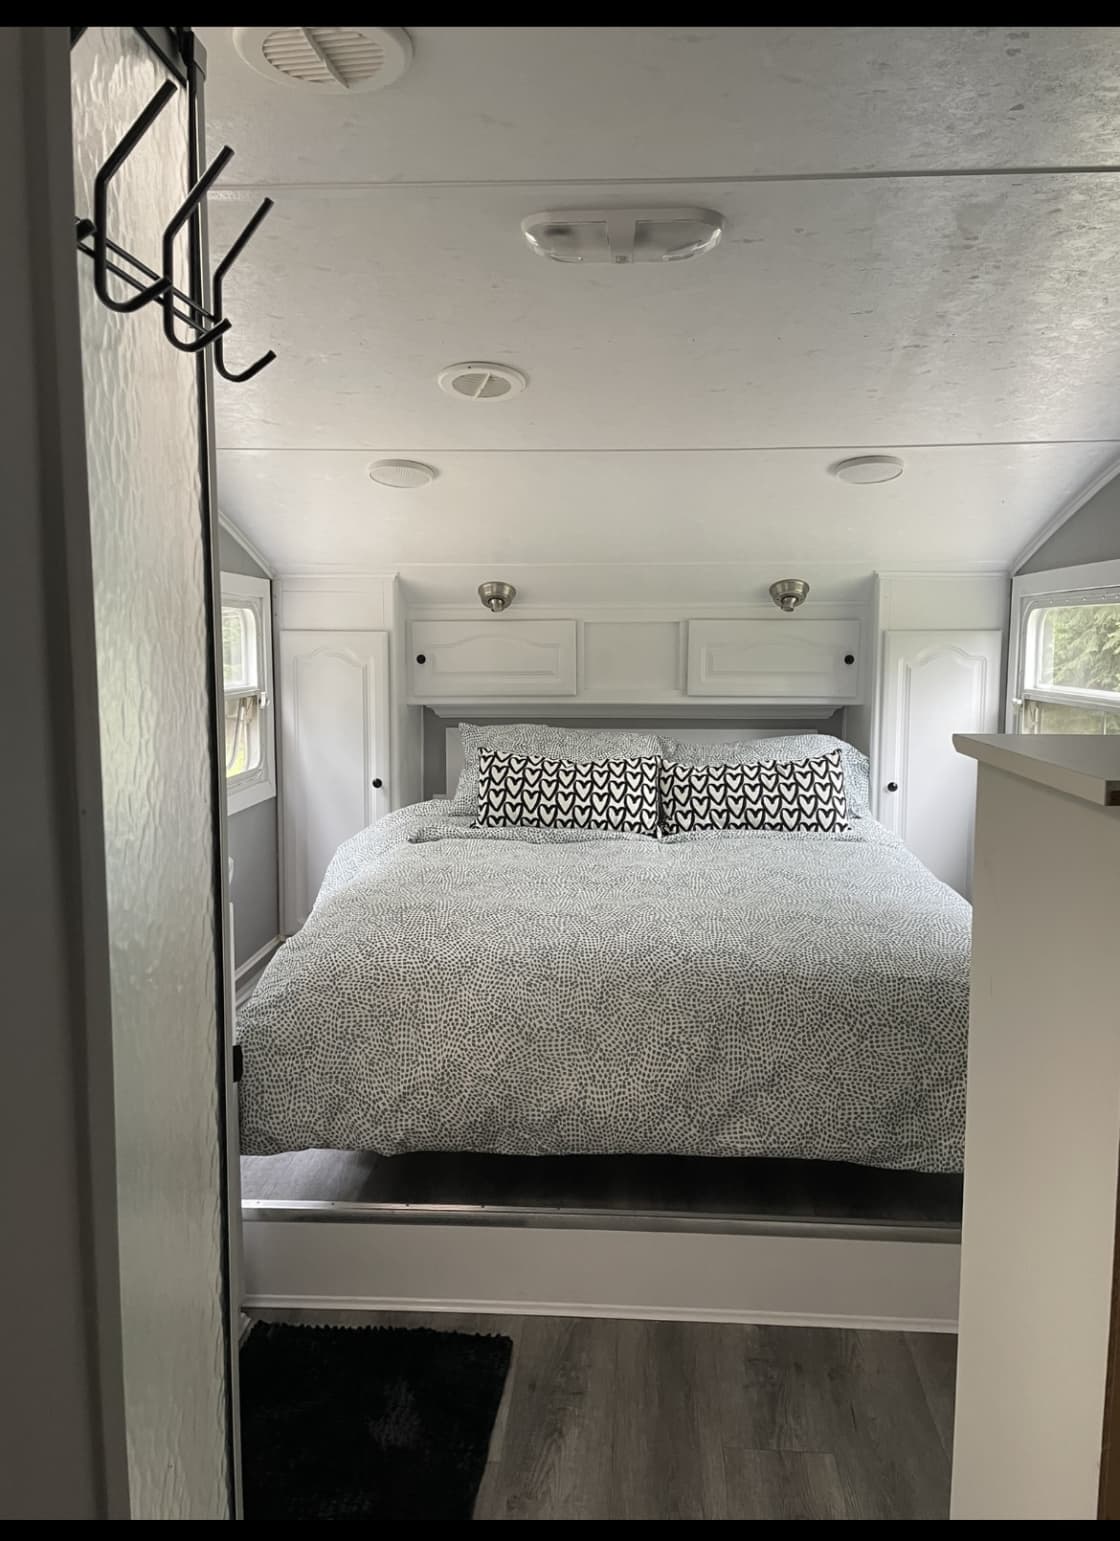 Clean, fully renovated trailer